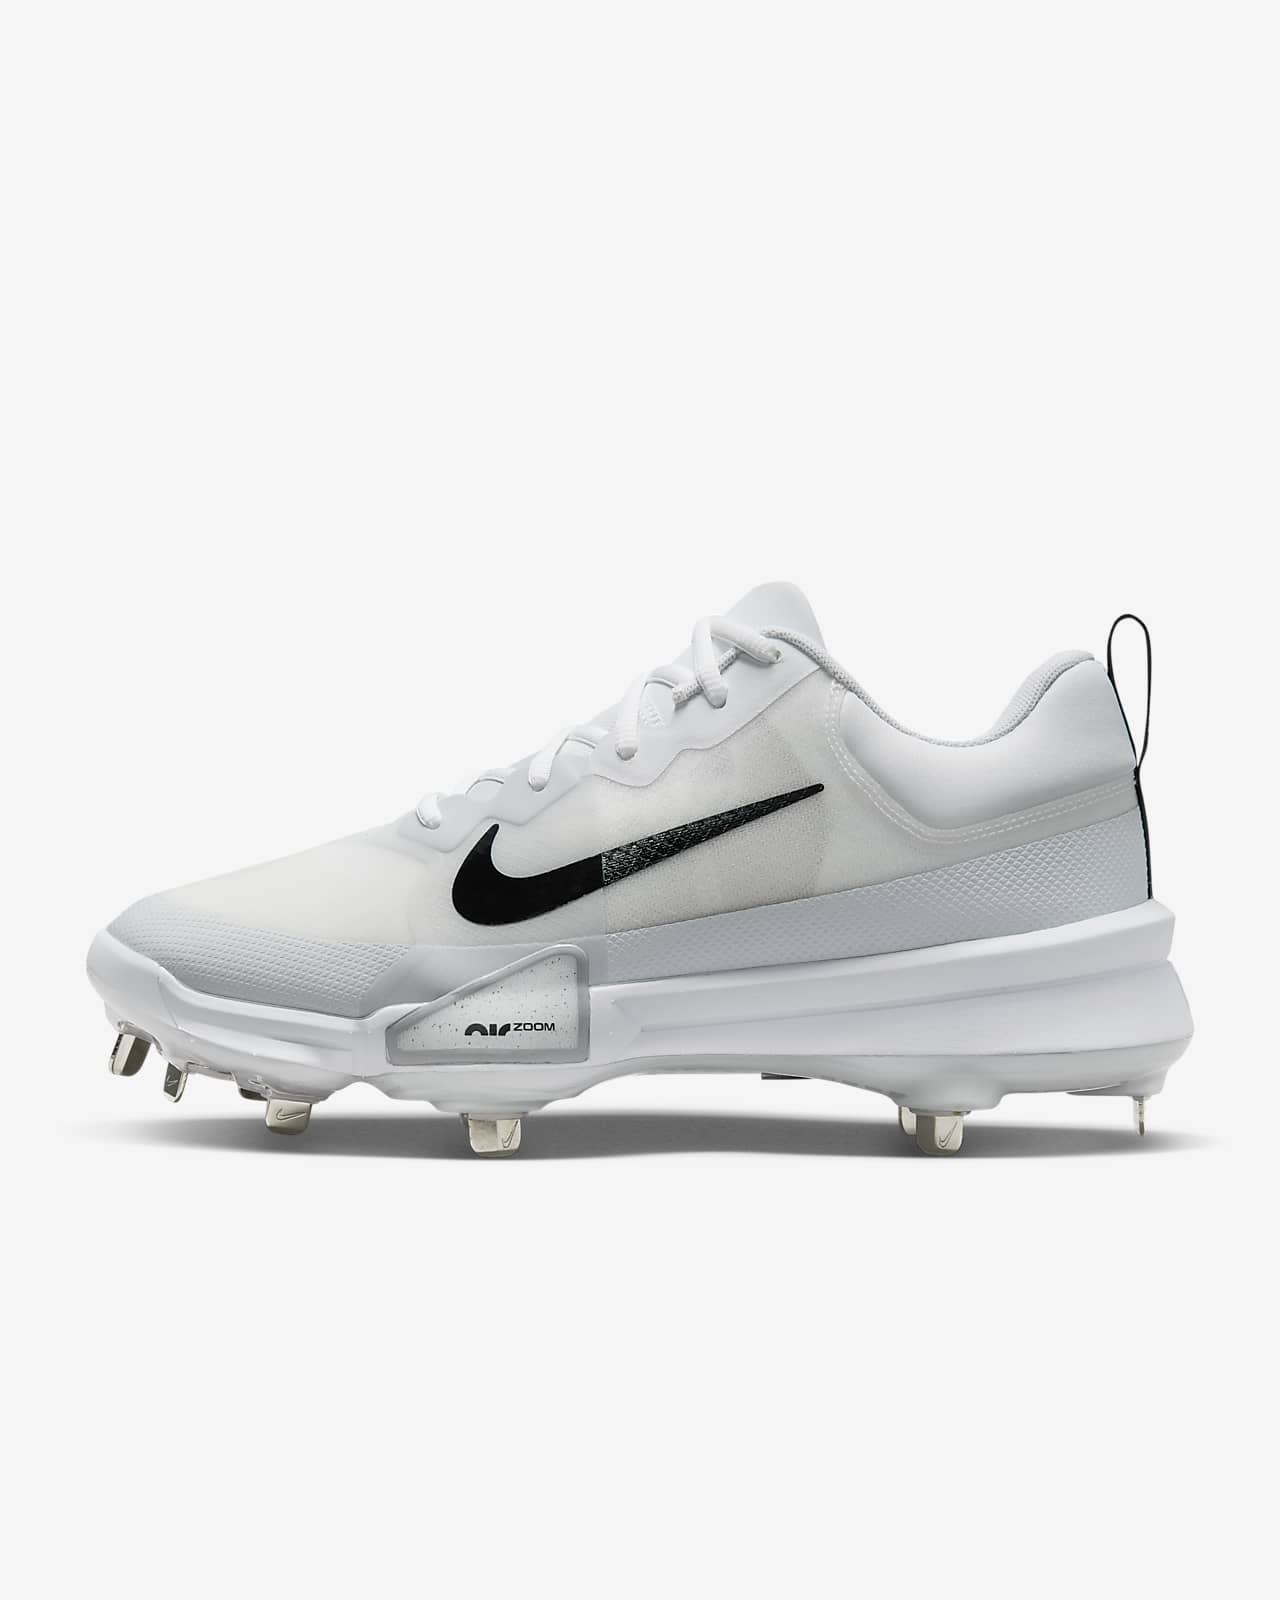 Nike Force Zoom Mike Trout 7 Baseball Cleats Black White